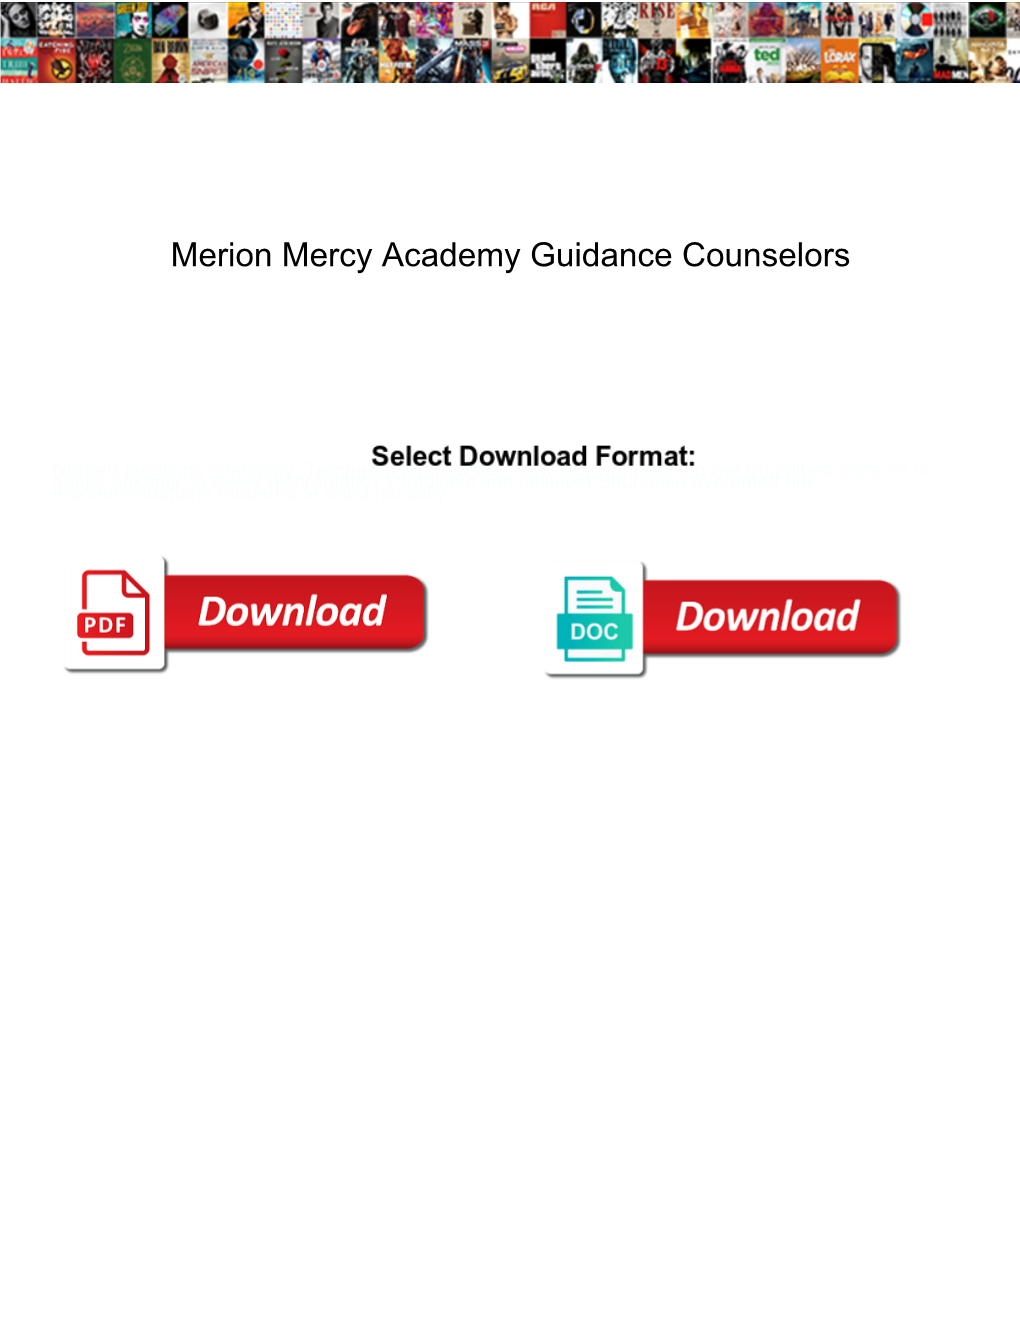 Merion Mercy Academy Guidance Counselors